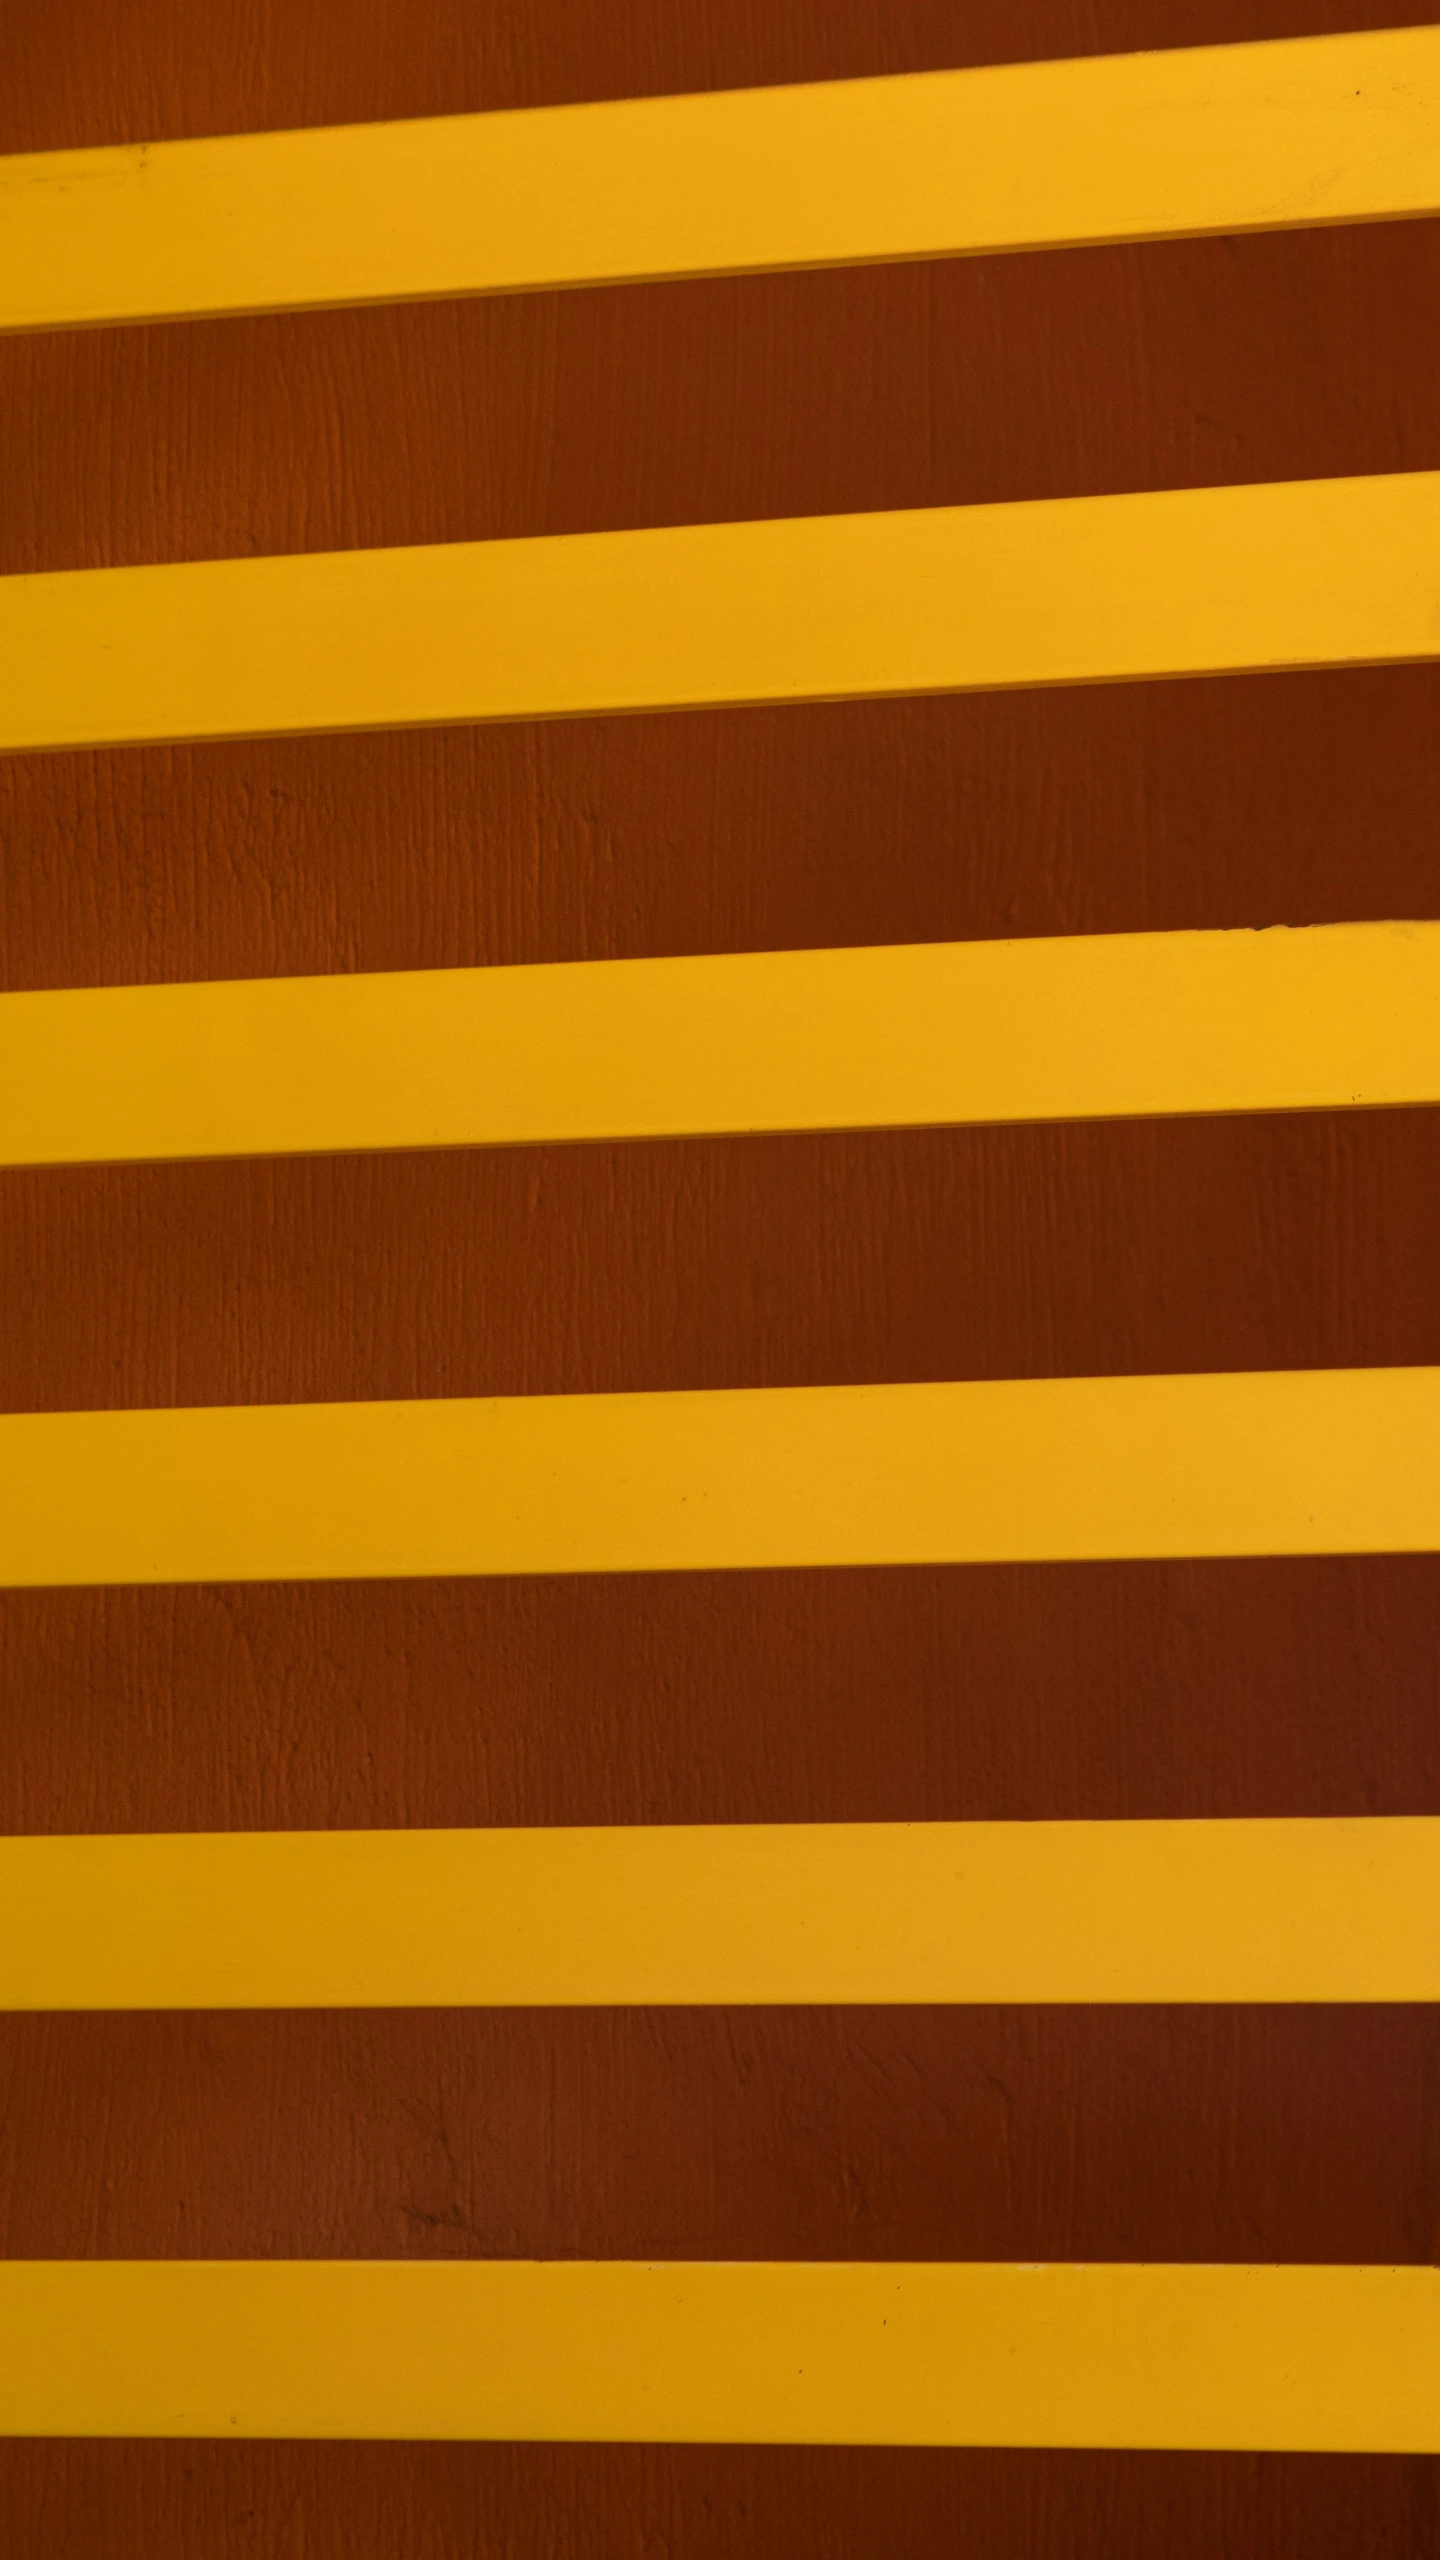 brown and yellow stripes are in an abstract pattern